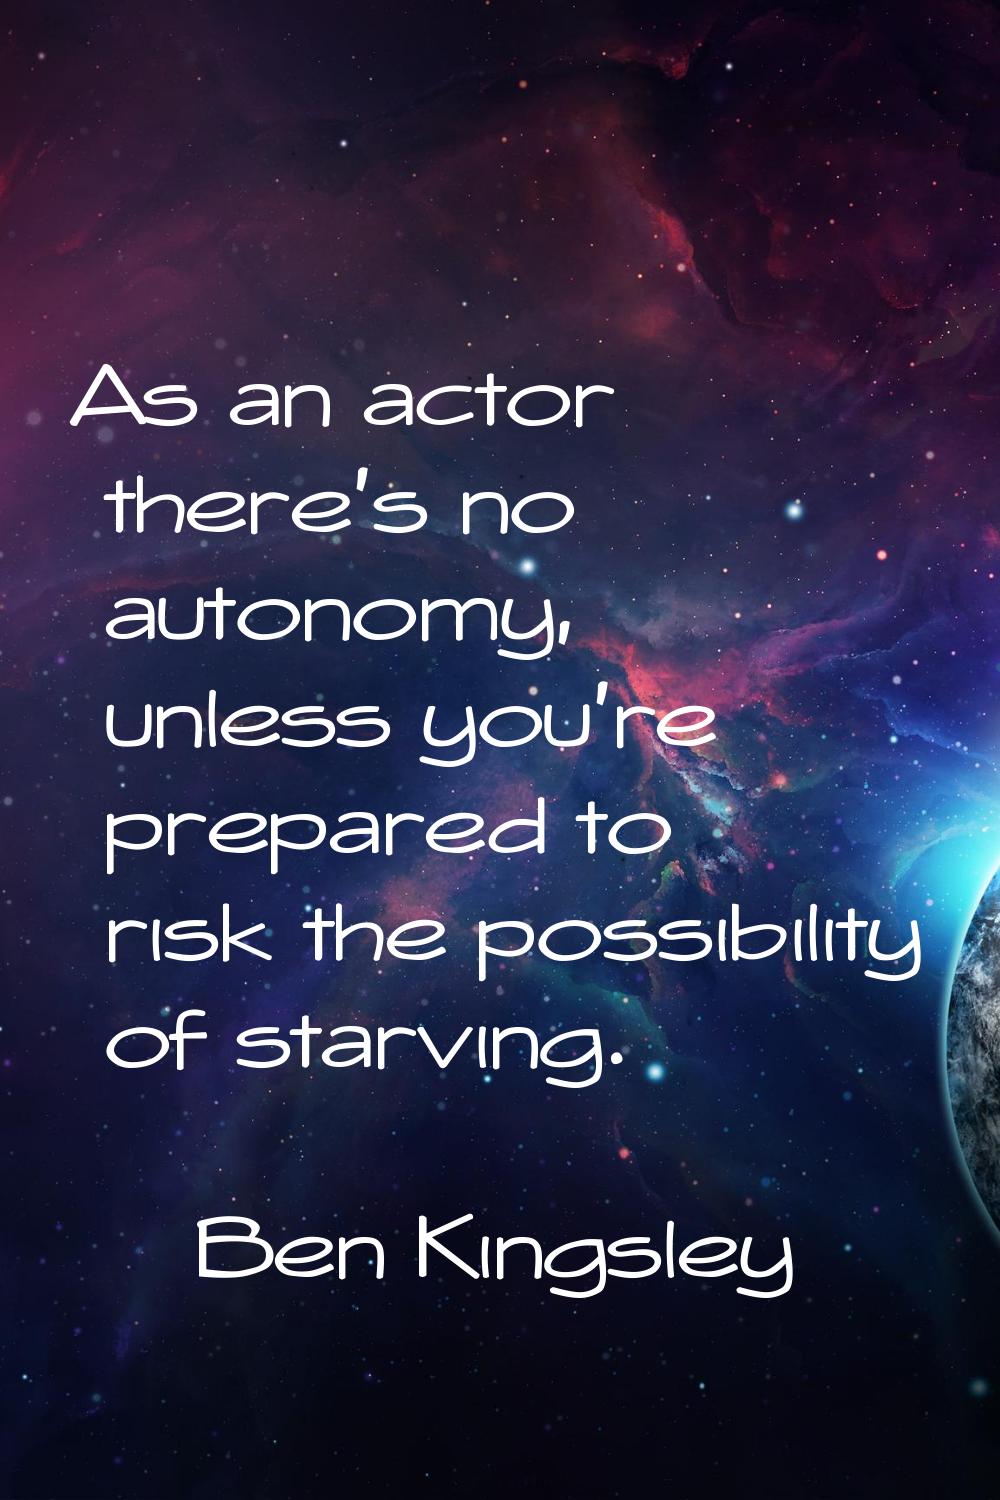 As an actor there's no autonomy, unless you're prepared to risk the possibility of starving.